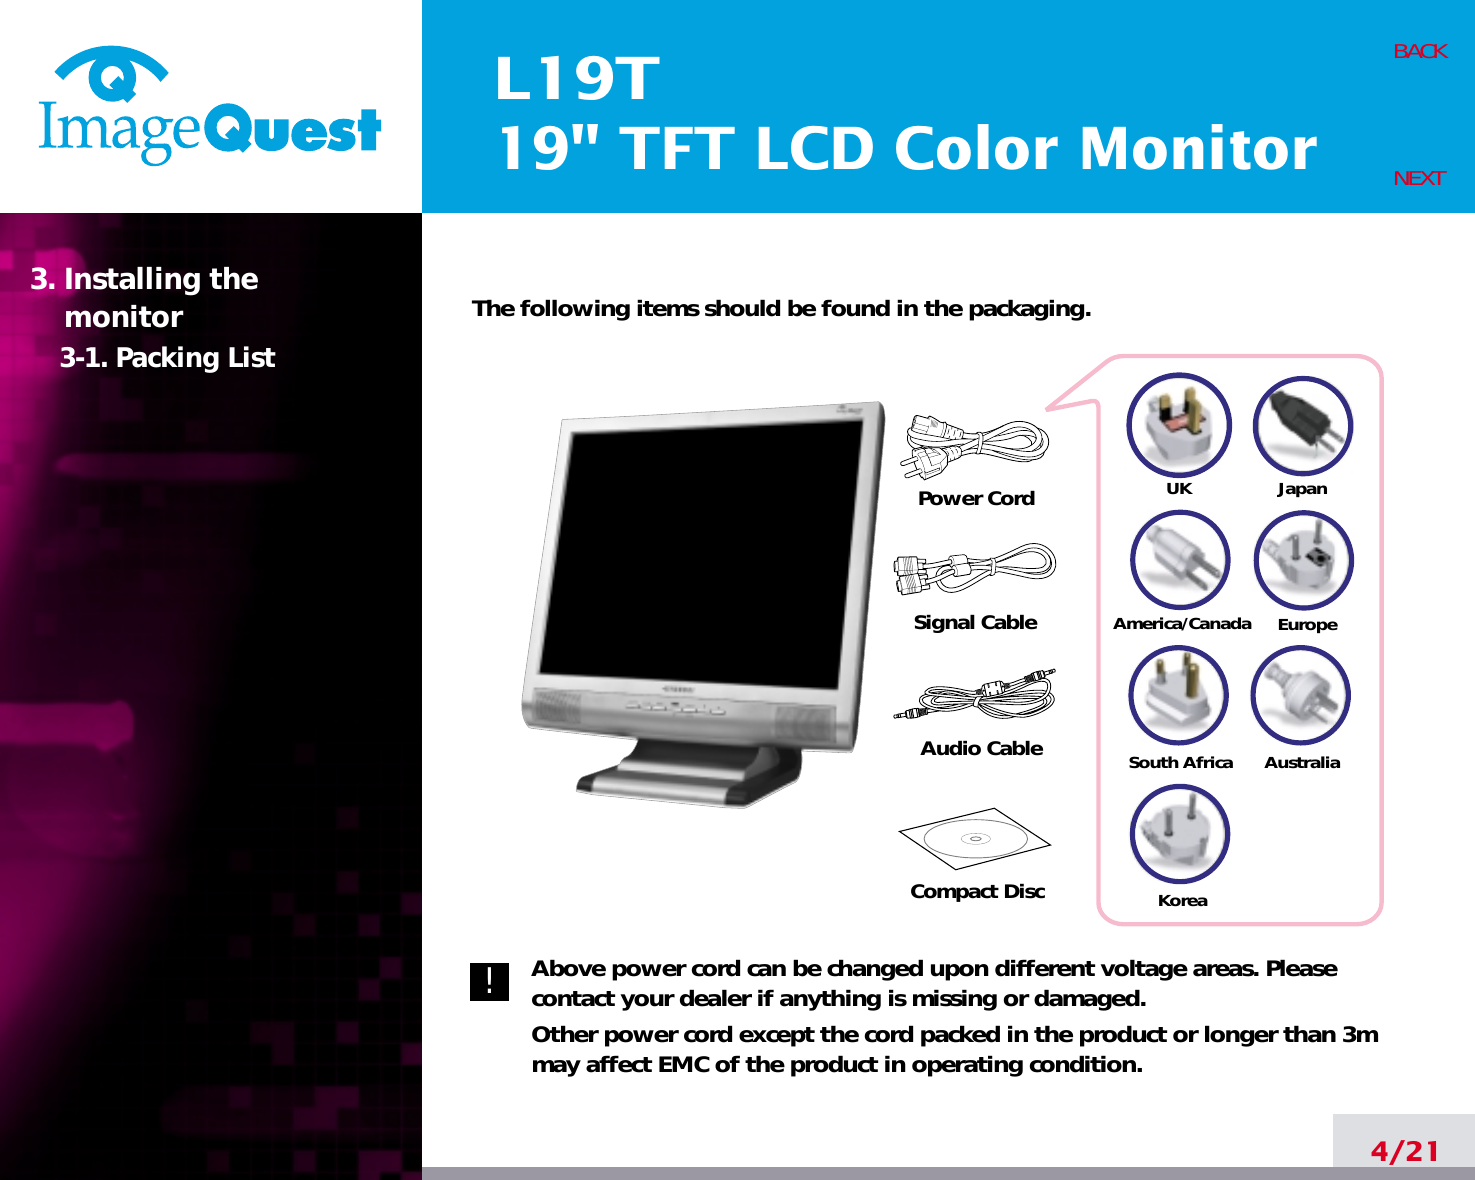 L19T19&quot; TFT LCD Color Monitor4/21BACKNEXTThe following items should be found in the packaging.Above power cord can be changed upon different voltage areas. Pleasecontact your dealer if anything is missing or damaged.Other power cord except the cord packed in the product or longer than 3mmay affect EMC of the product in operating condition.3. Installing the monitor3-1. Packing List!UKAmerica/CanadaJapanAustraliaKoreaEuropeSouth AfricaPower CordSignal CableAudio Cable Compact Disc